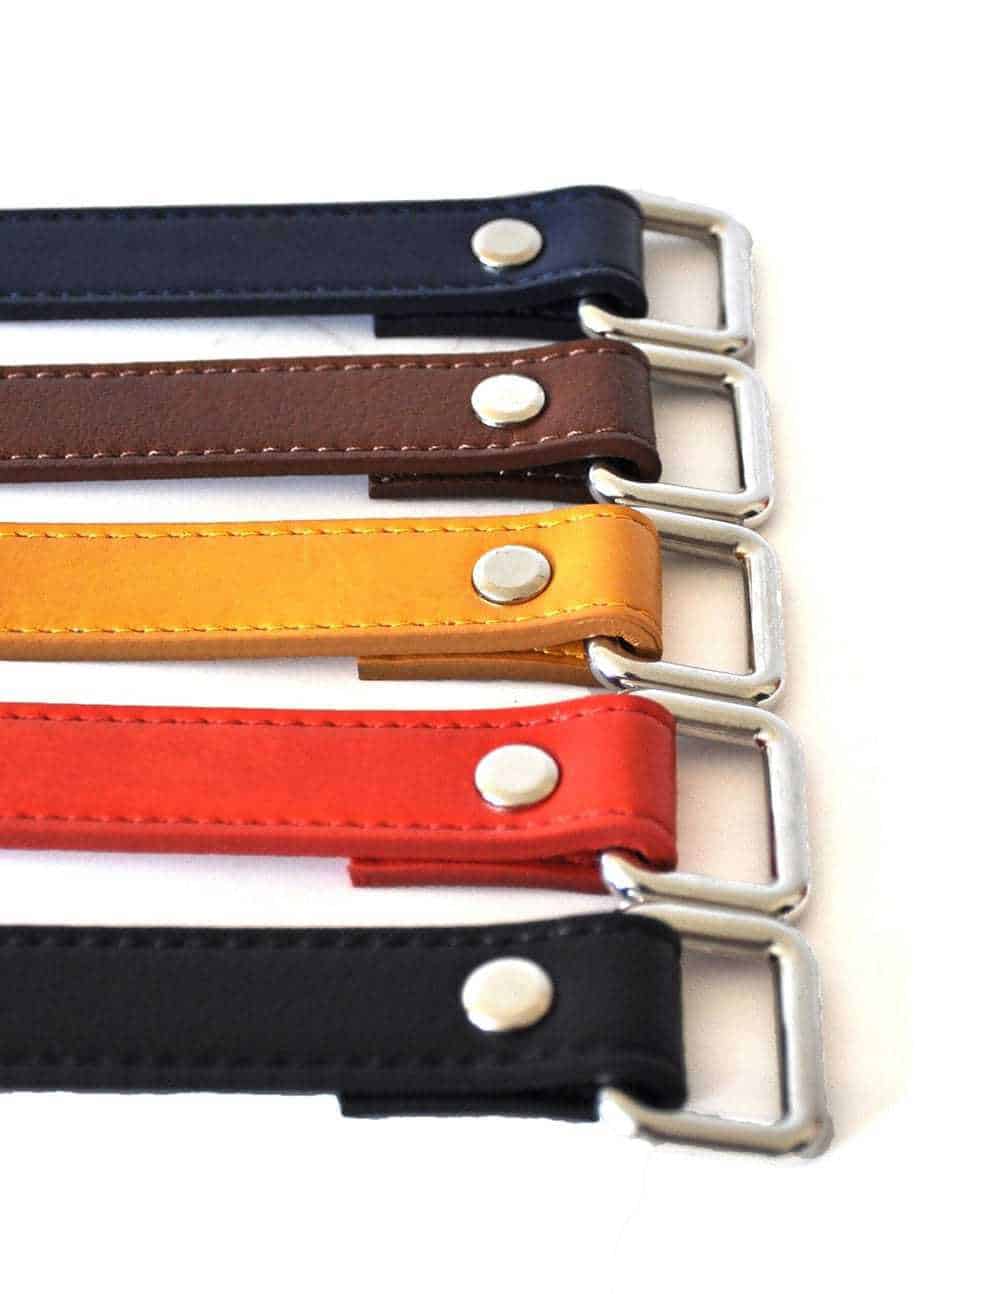 Blue, brown, yellow, red and black vegan leather belts with silver buckles from Noah